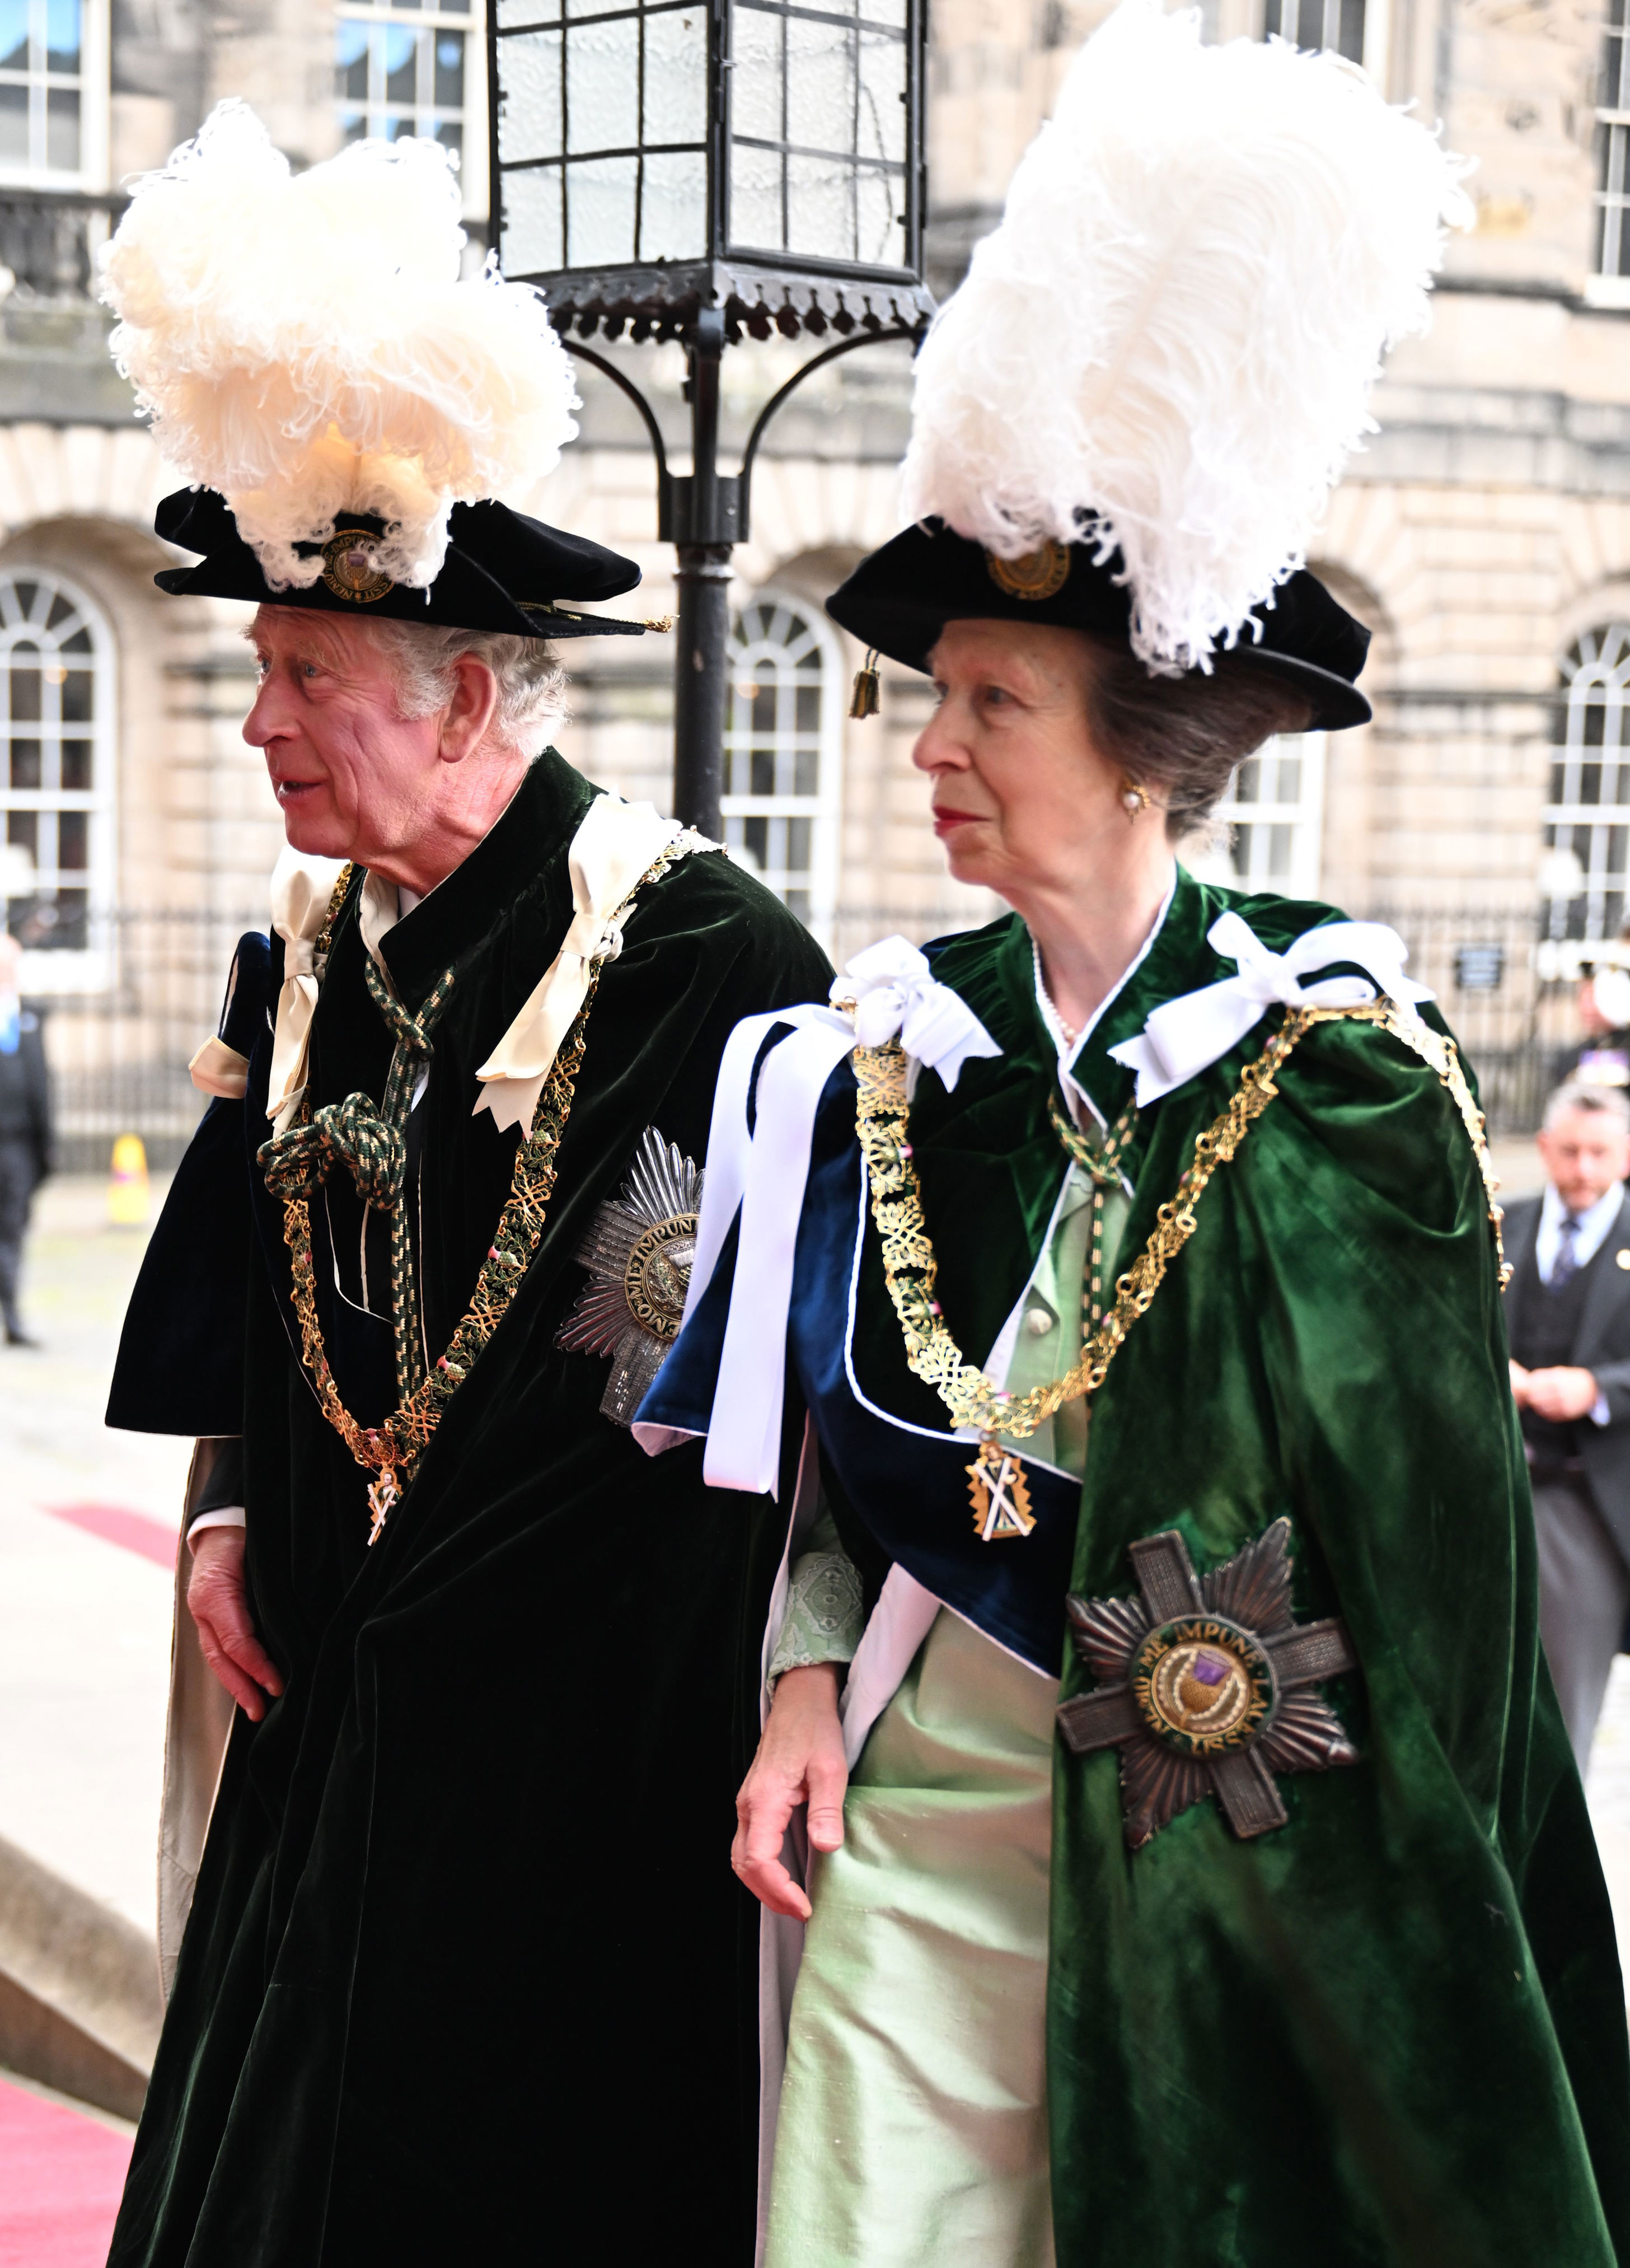 <p>Prince Charles and Princess Anne attended a service for the Order of the Thistle -- the highest order of chivalry in Scotland -- where they helped install two <span>new members at St. Giles' Cathedral in Edinburgh, Scotland, on June 30, 2022.</span></p>